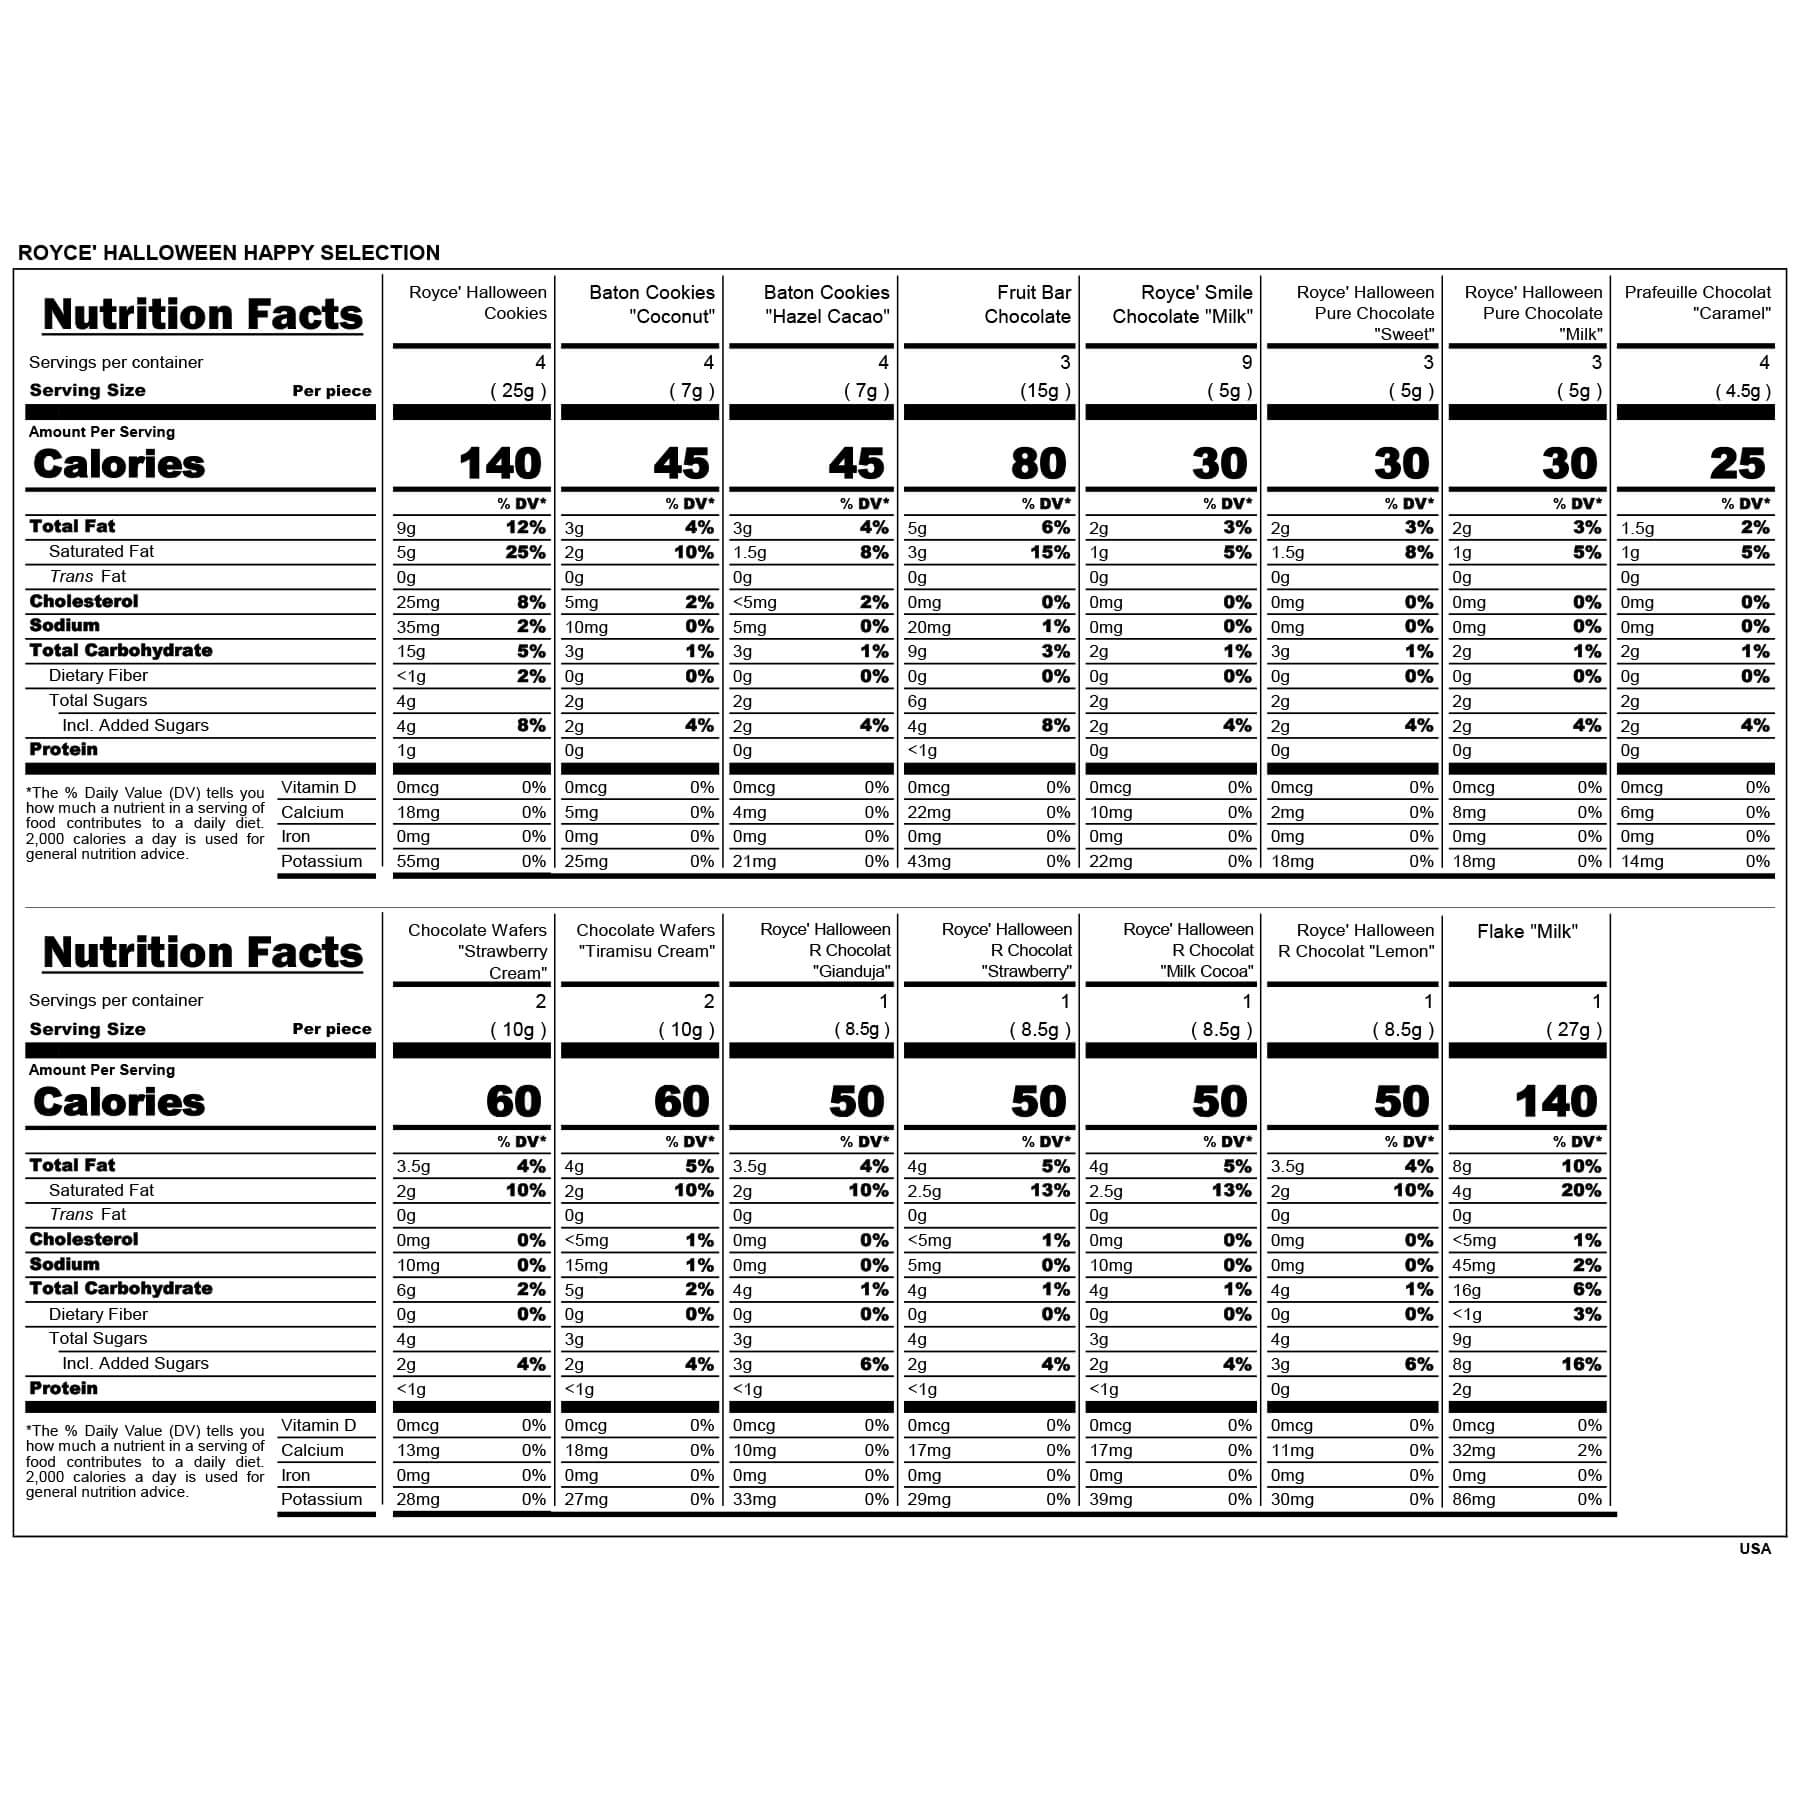 ROYCE' Chocolate - ROYCE' Halloween Happy Selection - Nutrition Facts